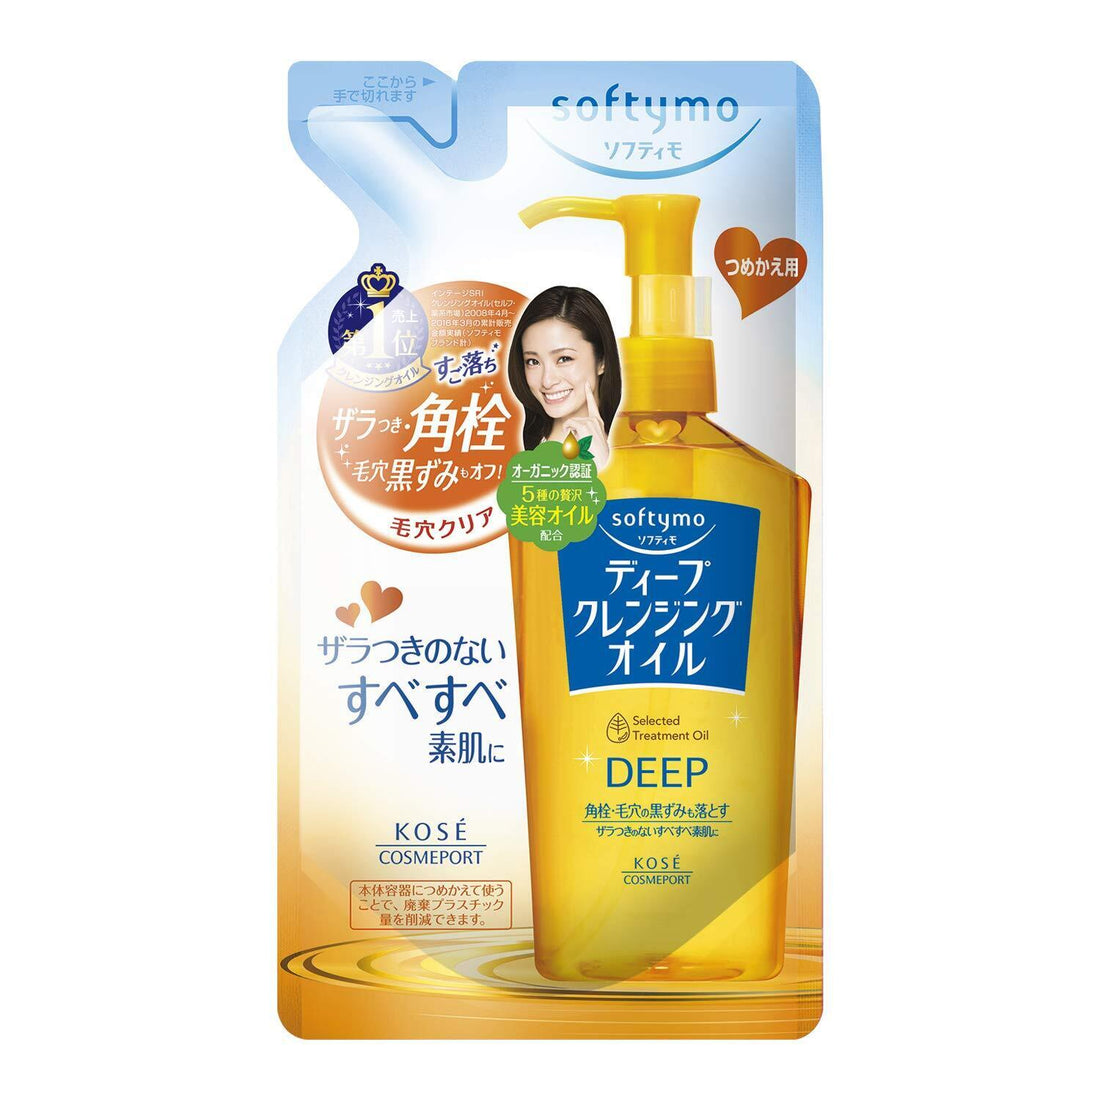 Kose Softymo Deep Cleansing Oil Refill